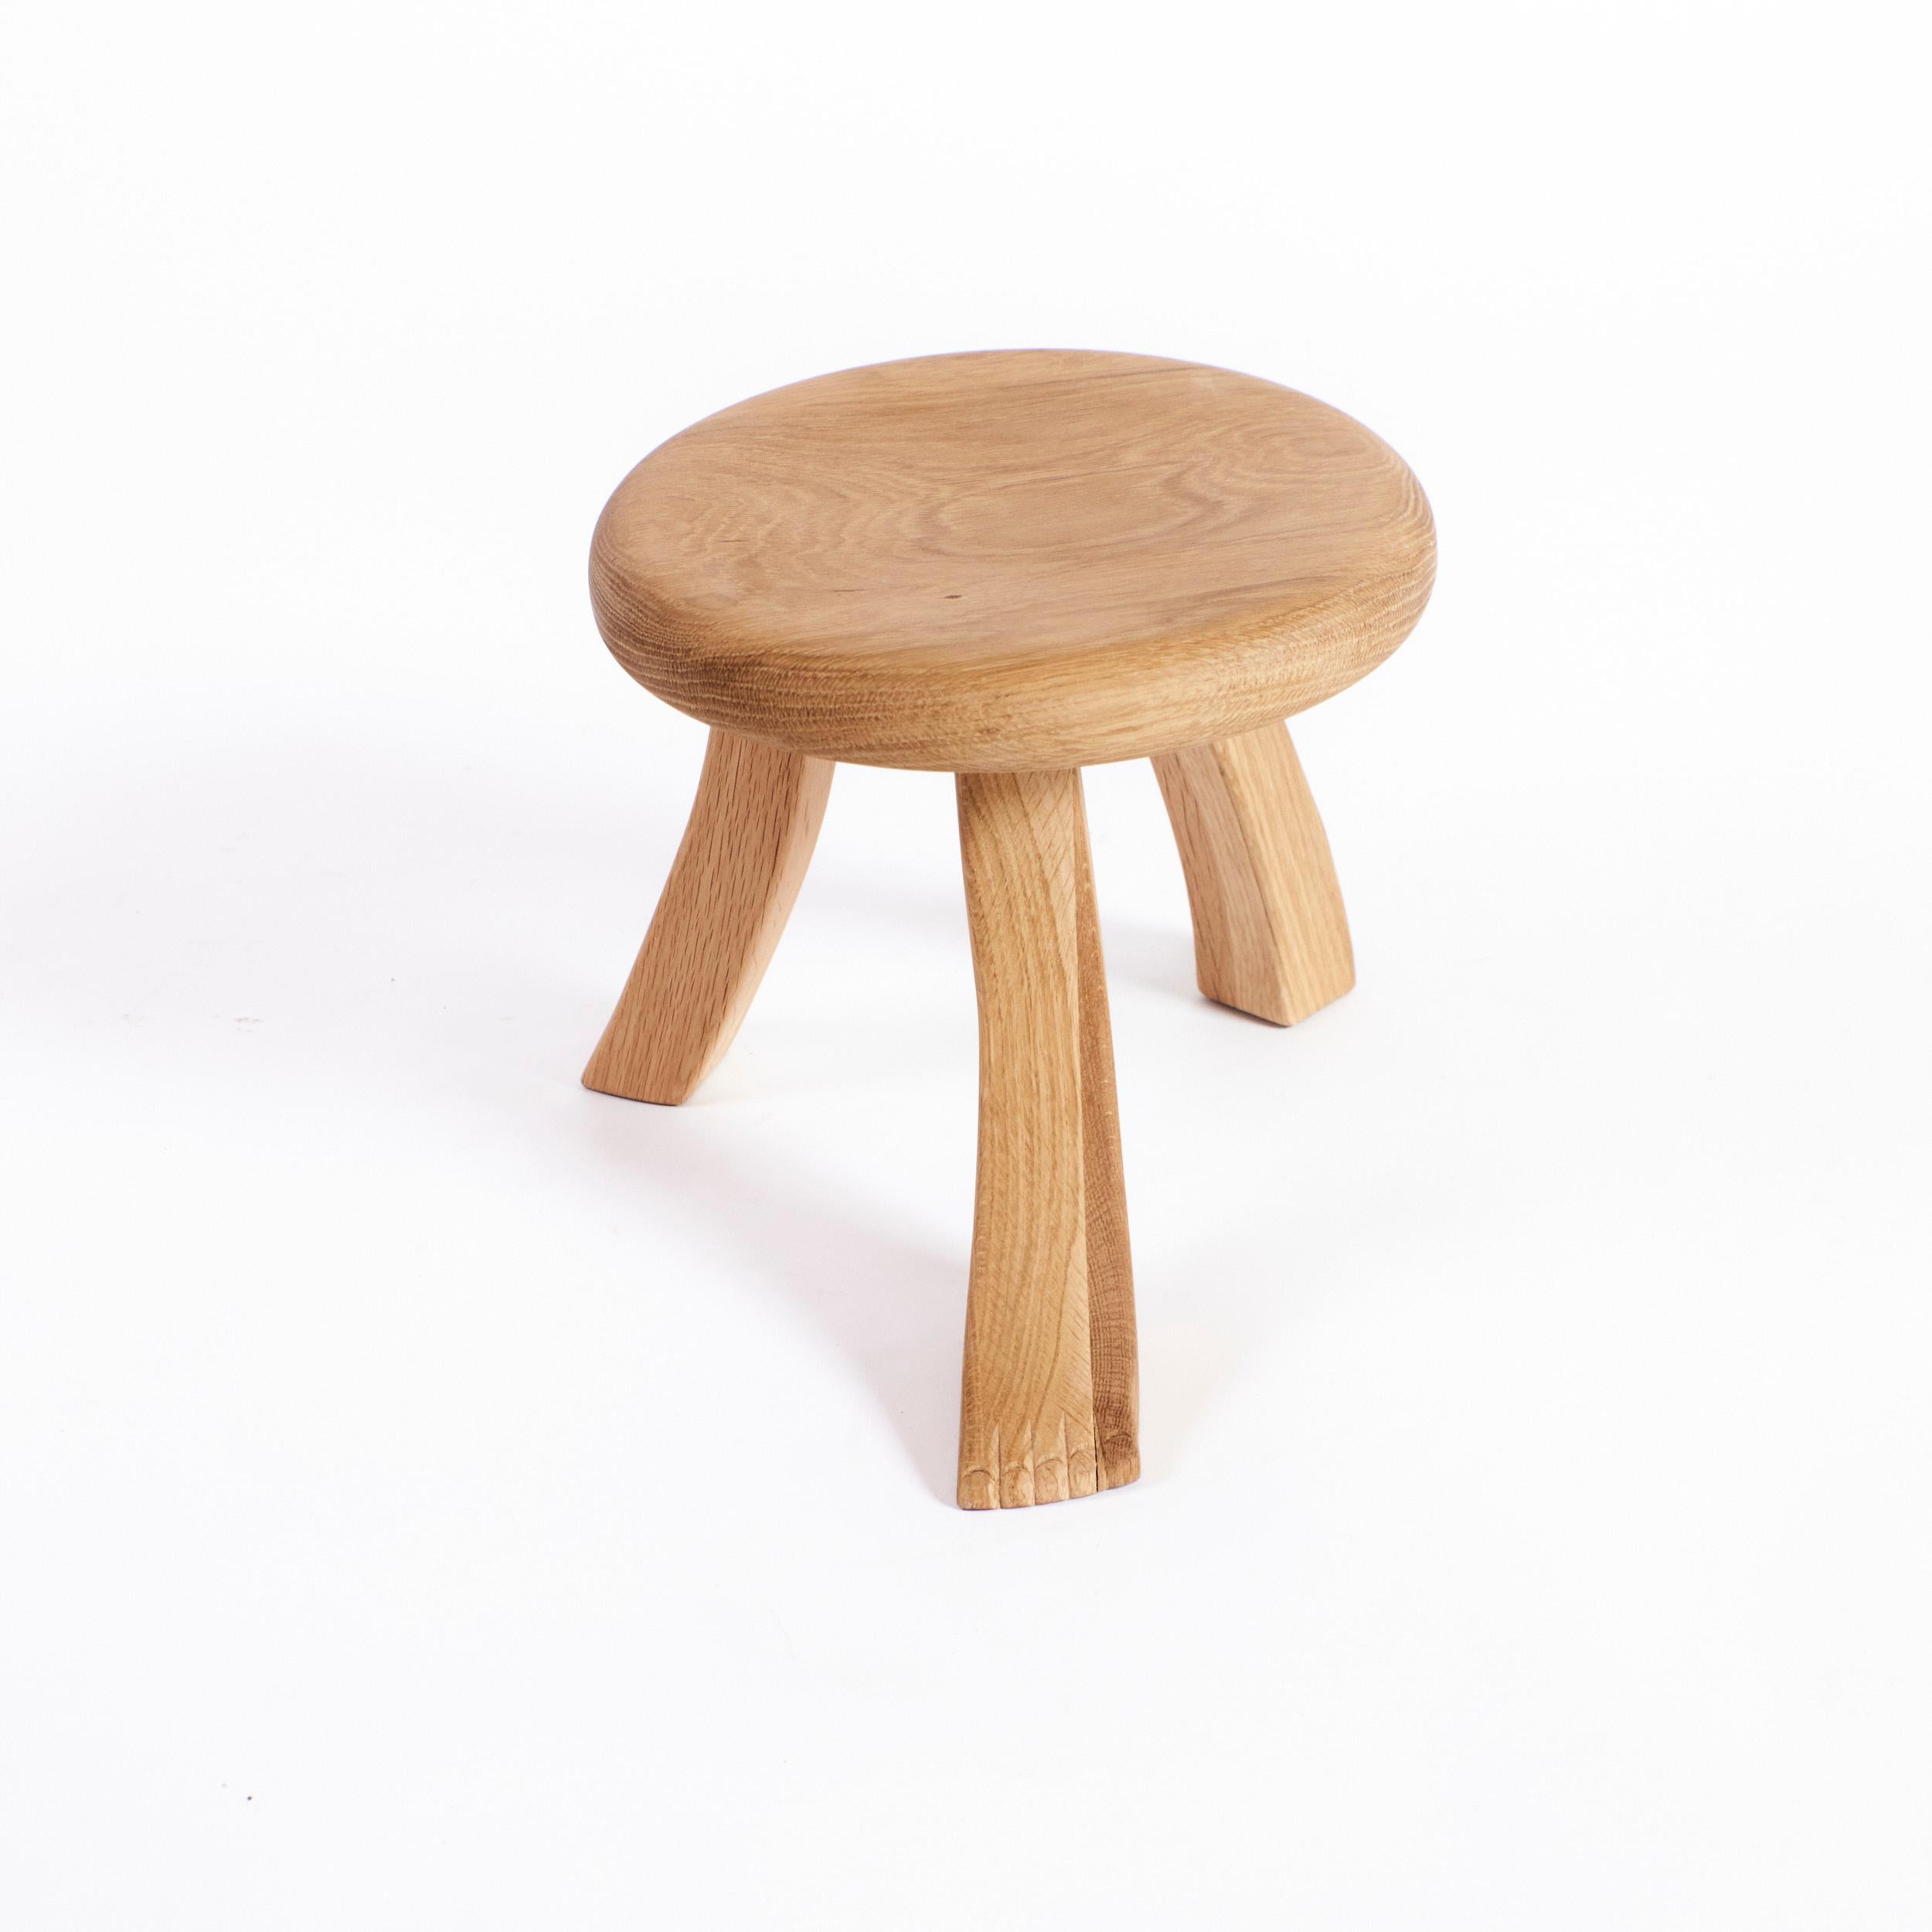 This playful design is inspired by a classic milking stool, and has a fun twist with three individually shaped legs. The stool is hand carved by artisans in northern Portugal from chestnut wood and oil finished to have a rich dark brown